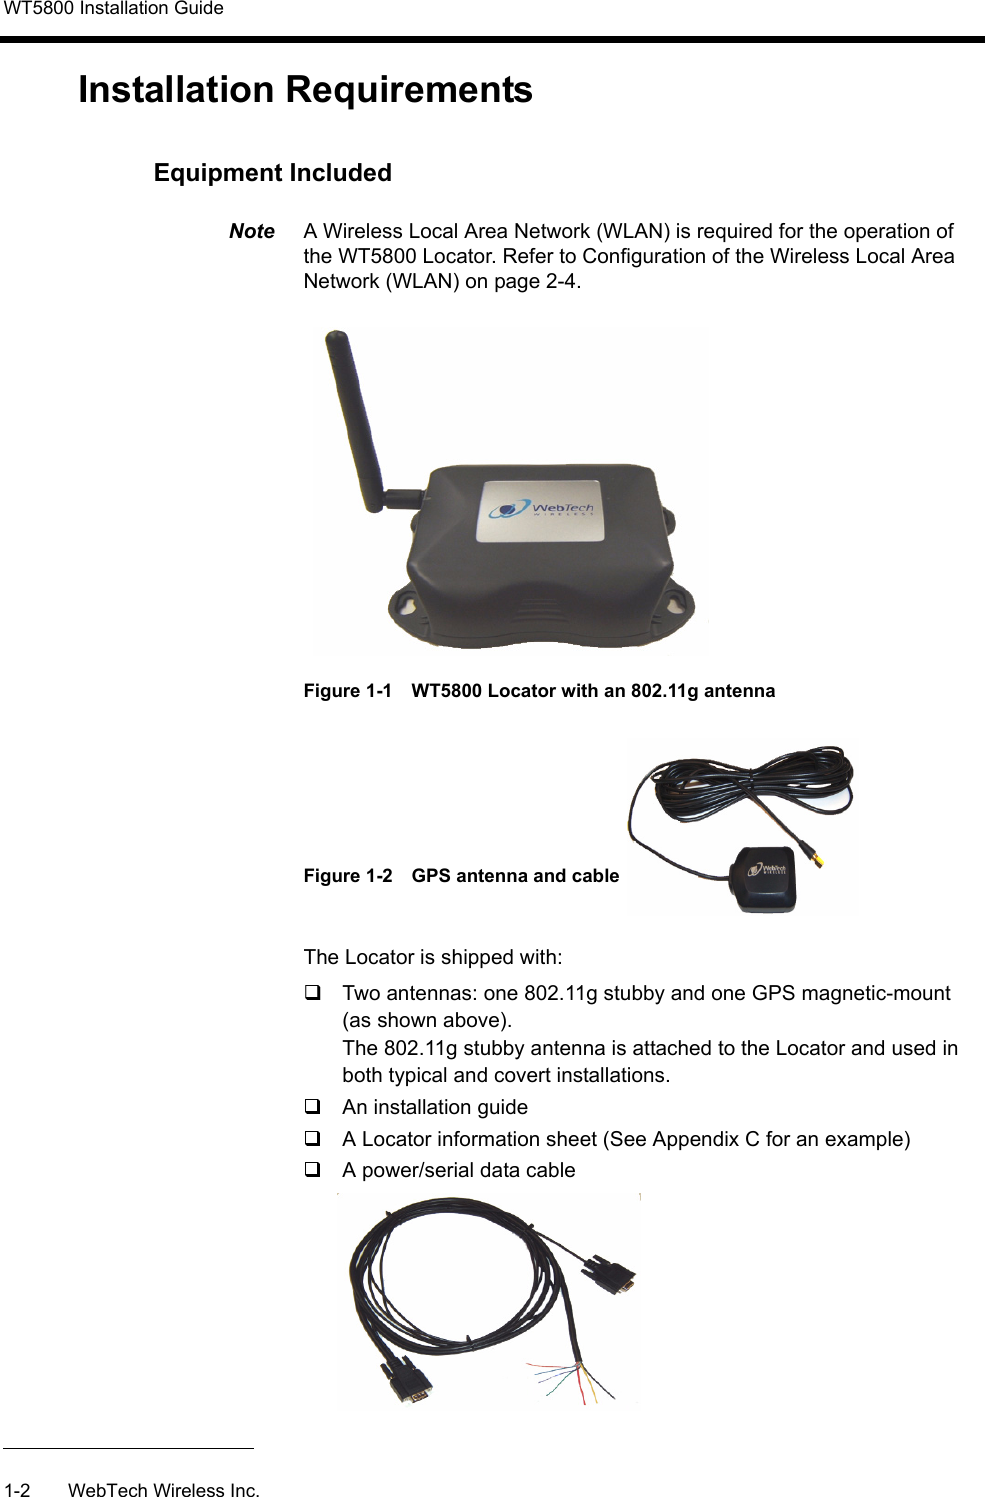 WT5800 Installation Guide1-2 WebTech Wireless Inc.Installation RequirementsEquipment IncludedNote  A Wireless Local Area Network (WLAN) is required for the operation of the WT5800 Locator. Refer to Configuration of the Wireless Local Area Network (WLAN) on page 2-4.Figure 1-1 WT5800 Locator with an 802.11g antenna Figure 1-2 GPS antenna and cableThe Locator is shipped with:Two antennas: one 802.11g stubby and one GPS magnetic-mount (as shown above).The 802.11g stubby antenna is attached to the Locator and used in both typical and covert installations.An installation guideA Locator information sheet (See Appendix C for an example)A power/serial data cable